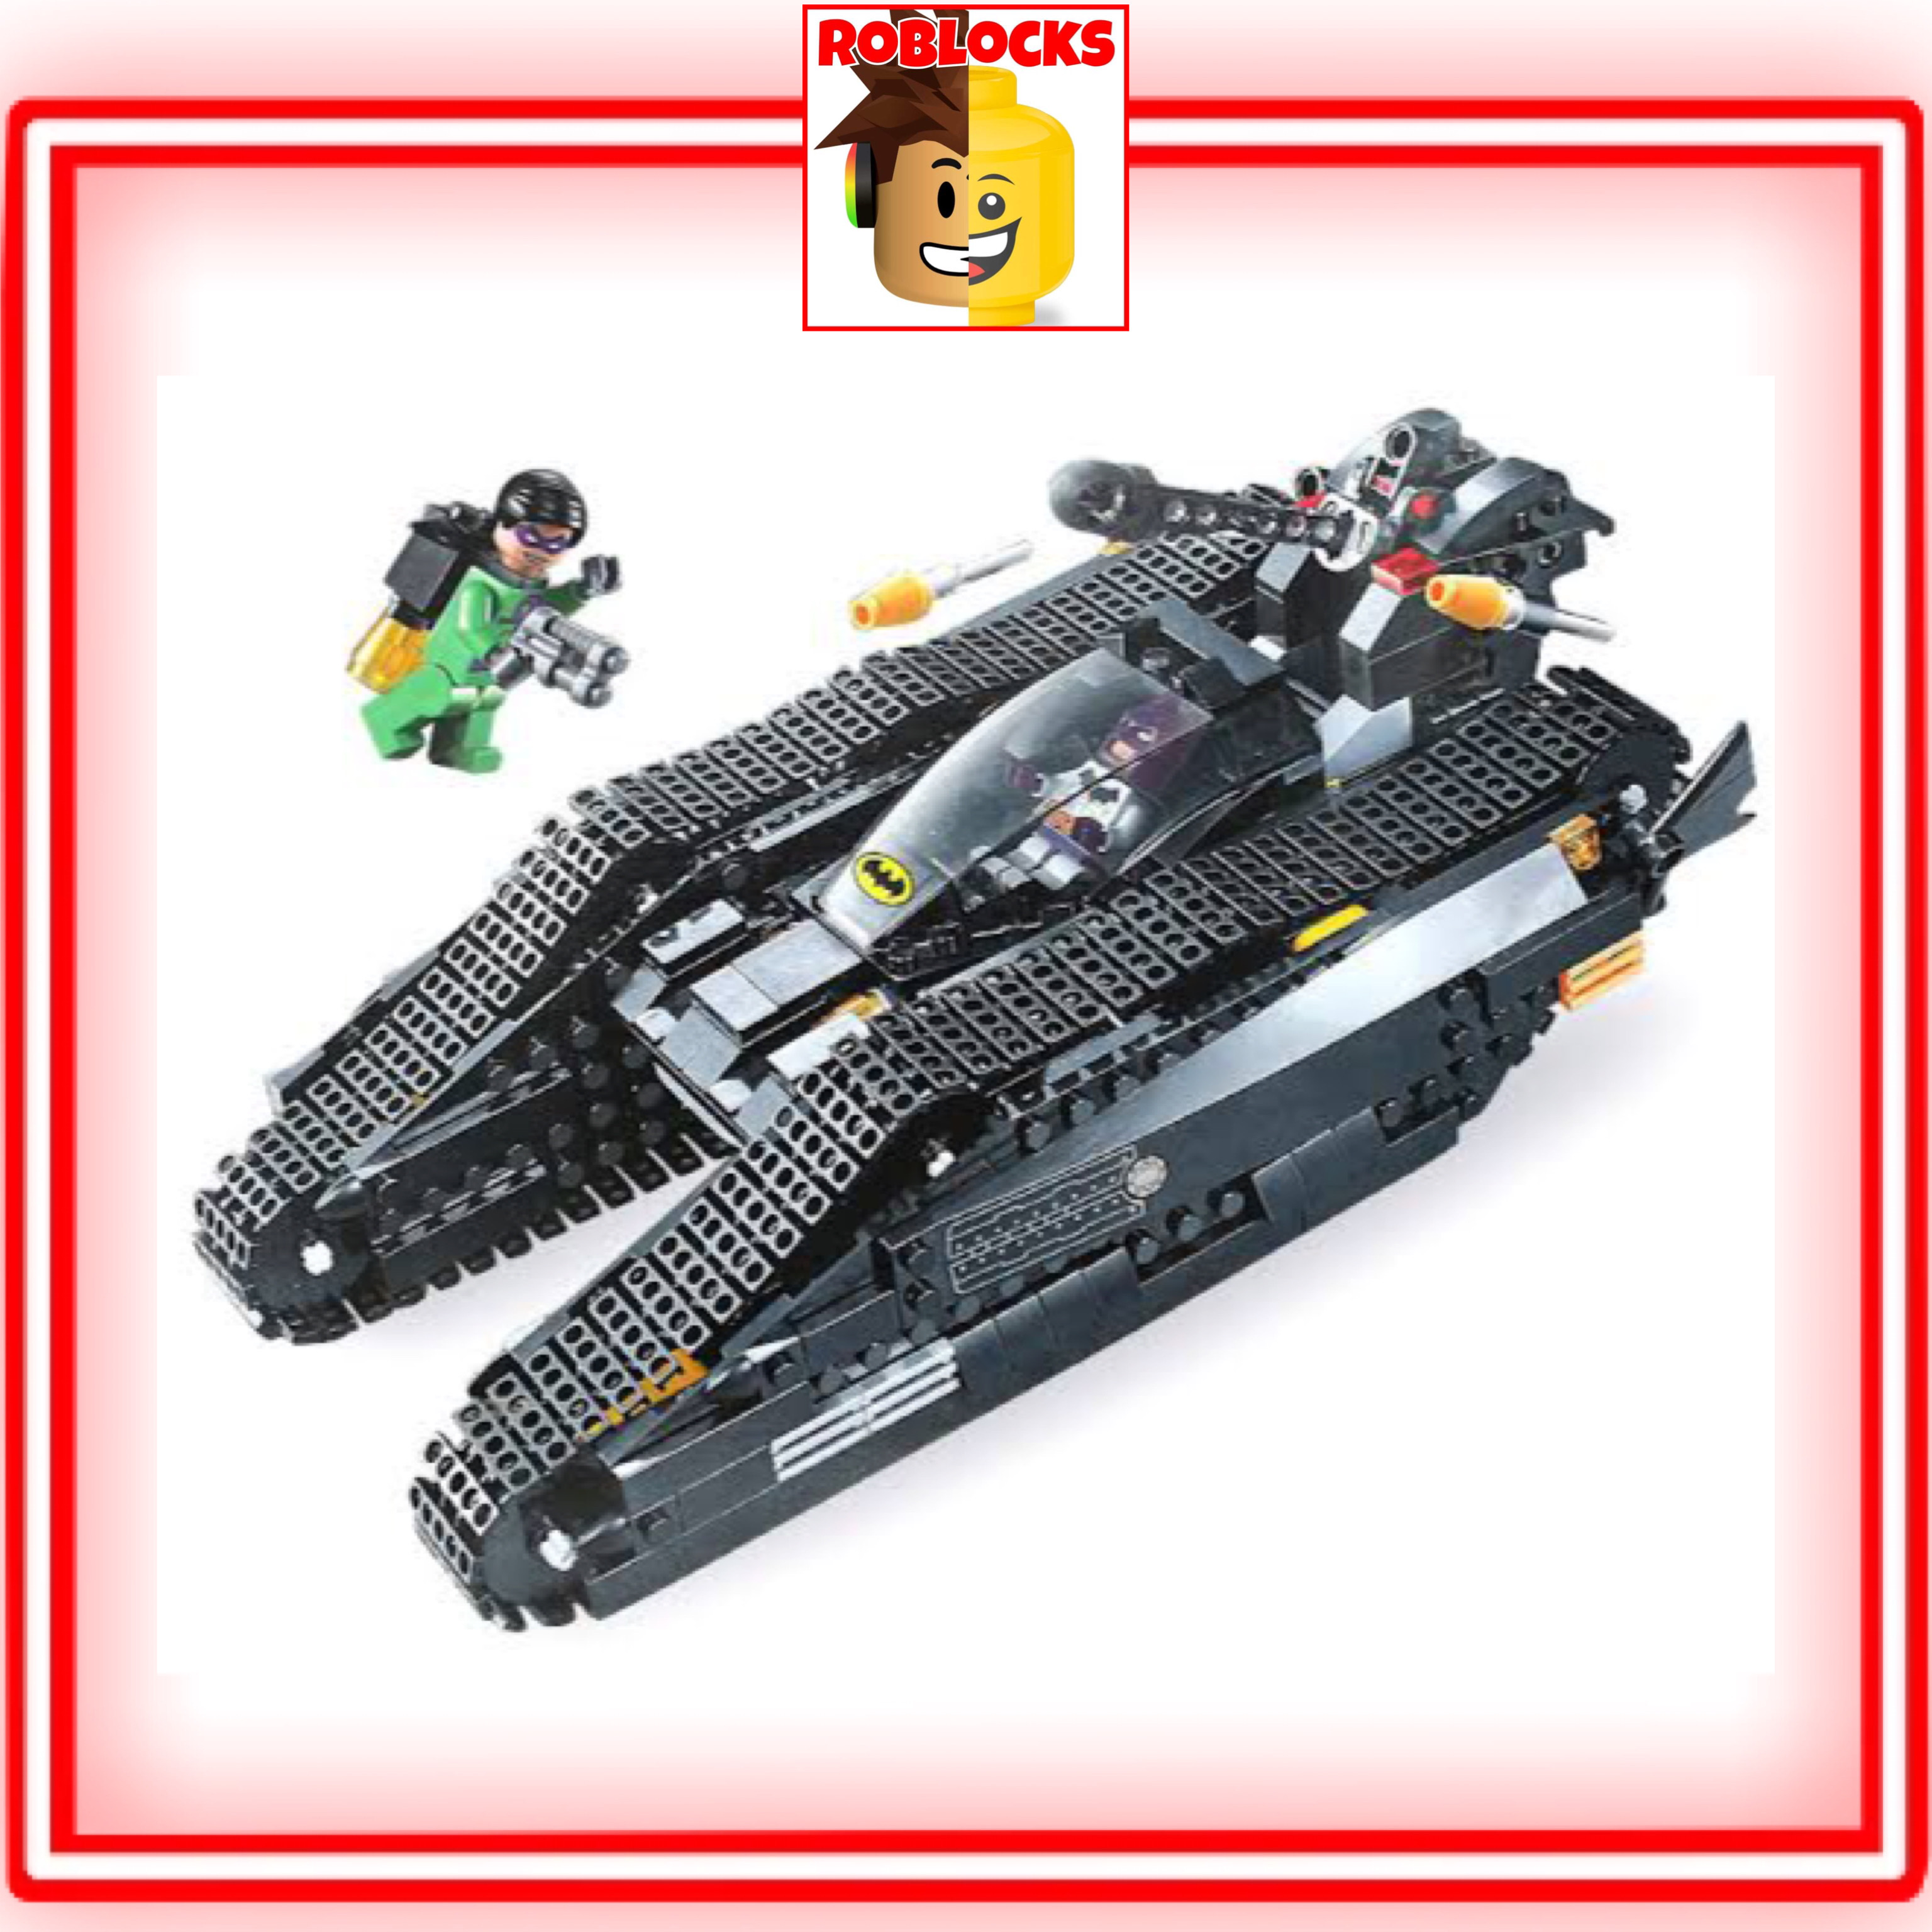 infrastruktur mandskab Danmark 506+pcs compatible LEGO BATMAN TOY BAT TANK Educational Building Block  Bricks Fun Playset Toys Playable by Adult Kids Boys With 2 Minifigures  Character Code JISI 7108 With Box Perfect Gift Idea Collection